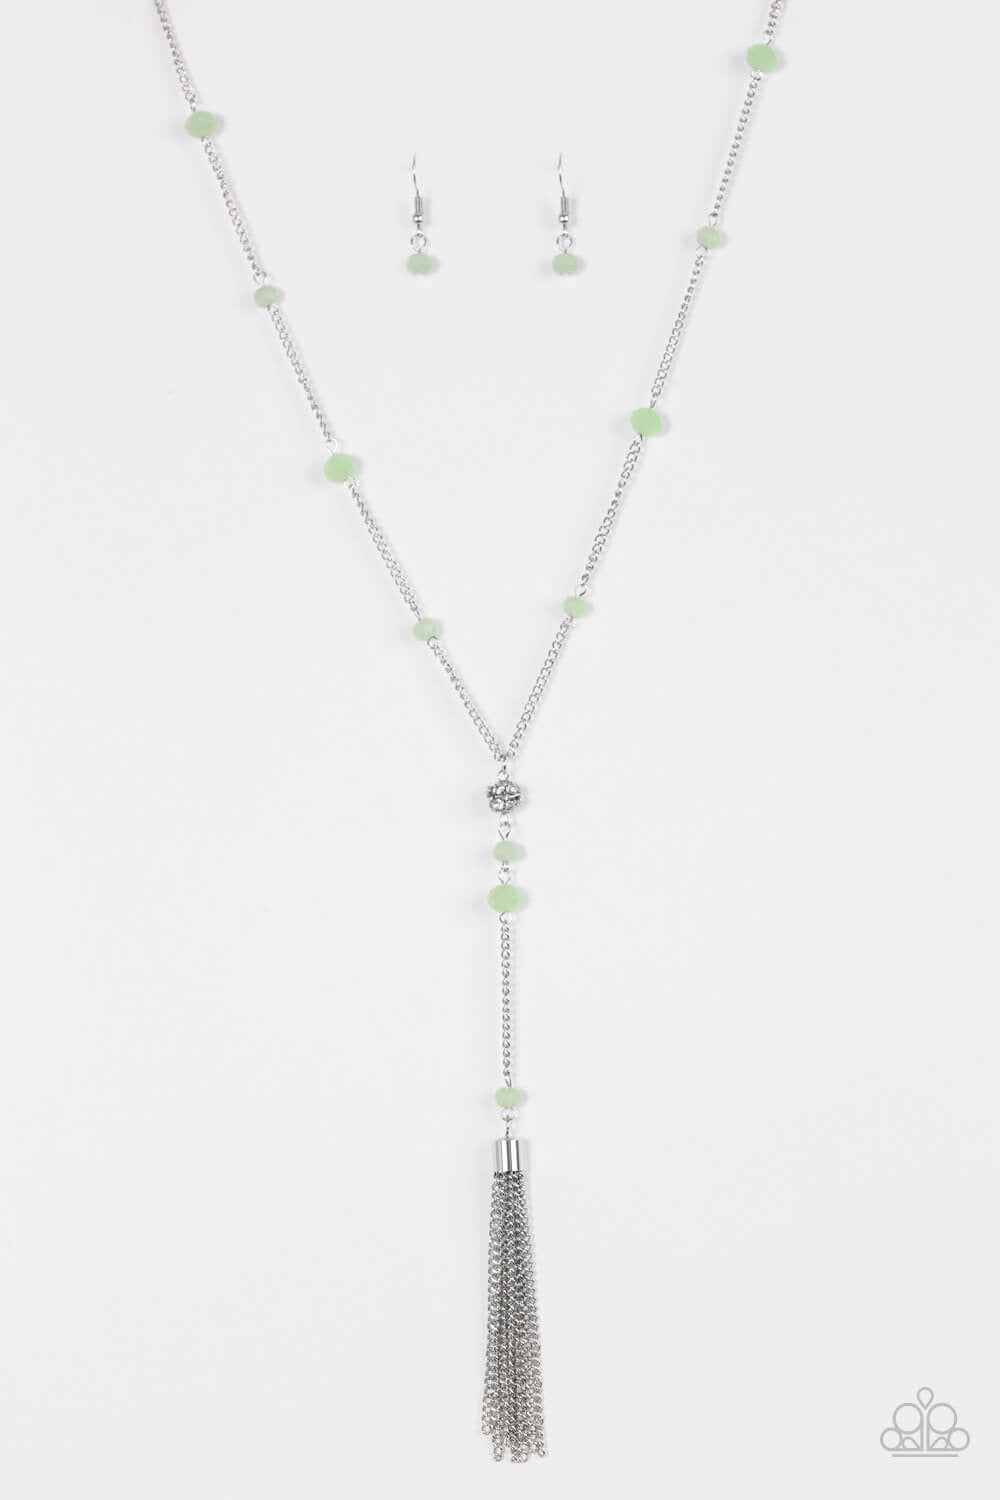 Vintage Paparazzi “Out All Night” Green Y Necklace